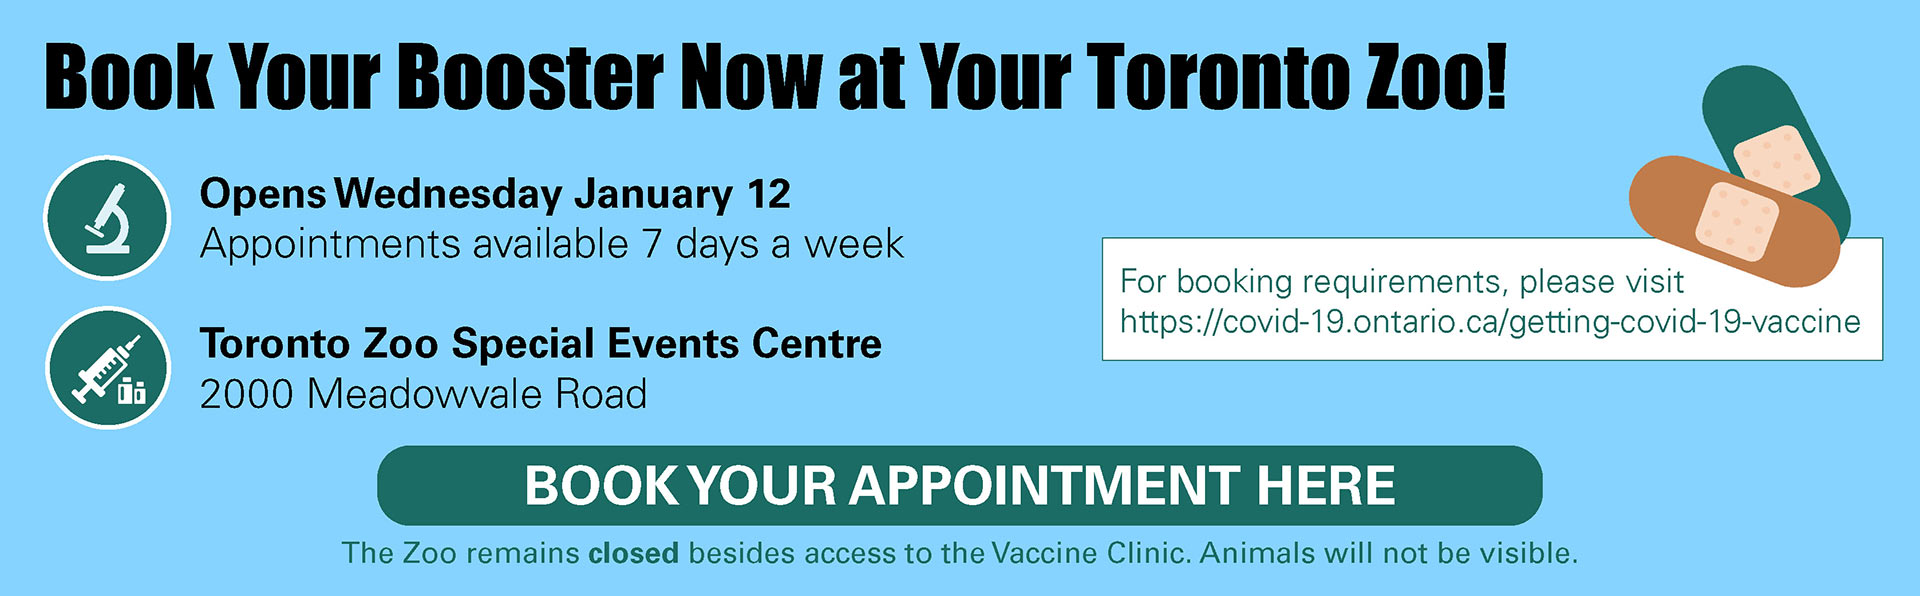 Book Your Booster Now at Your Toronto Zoo!